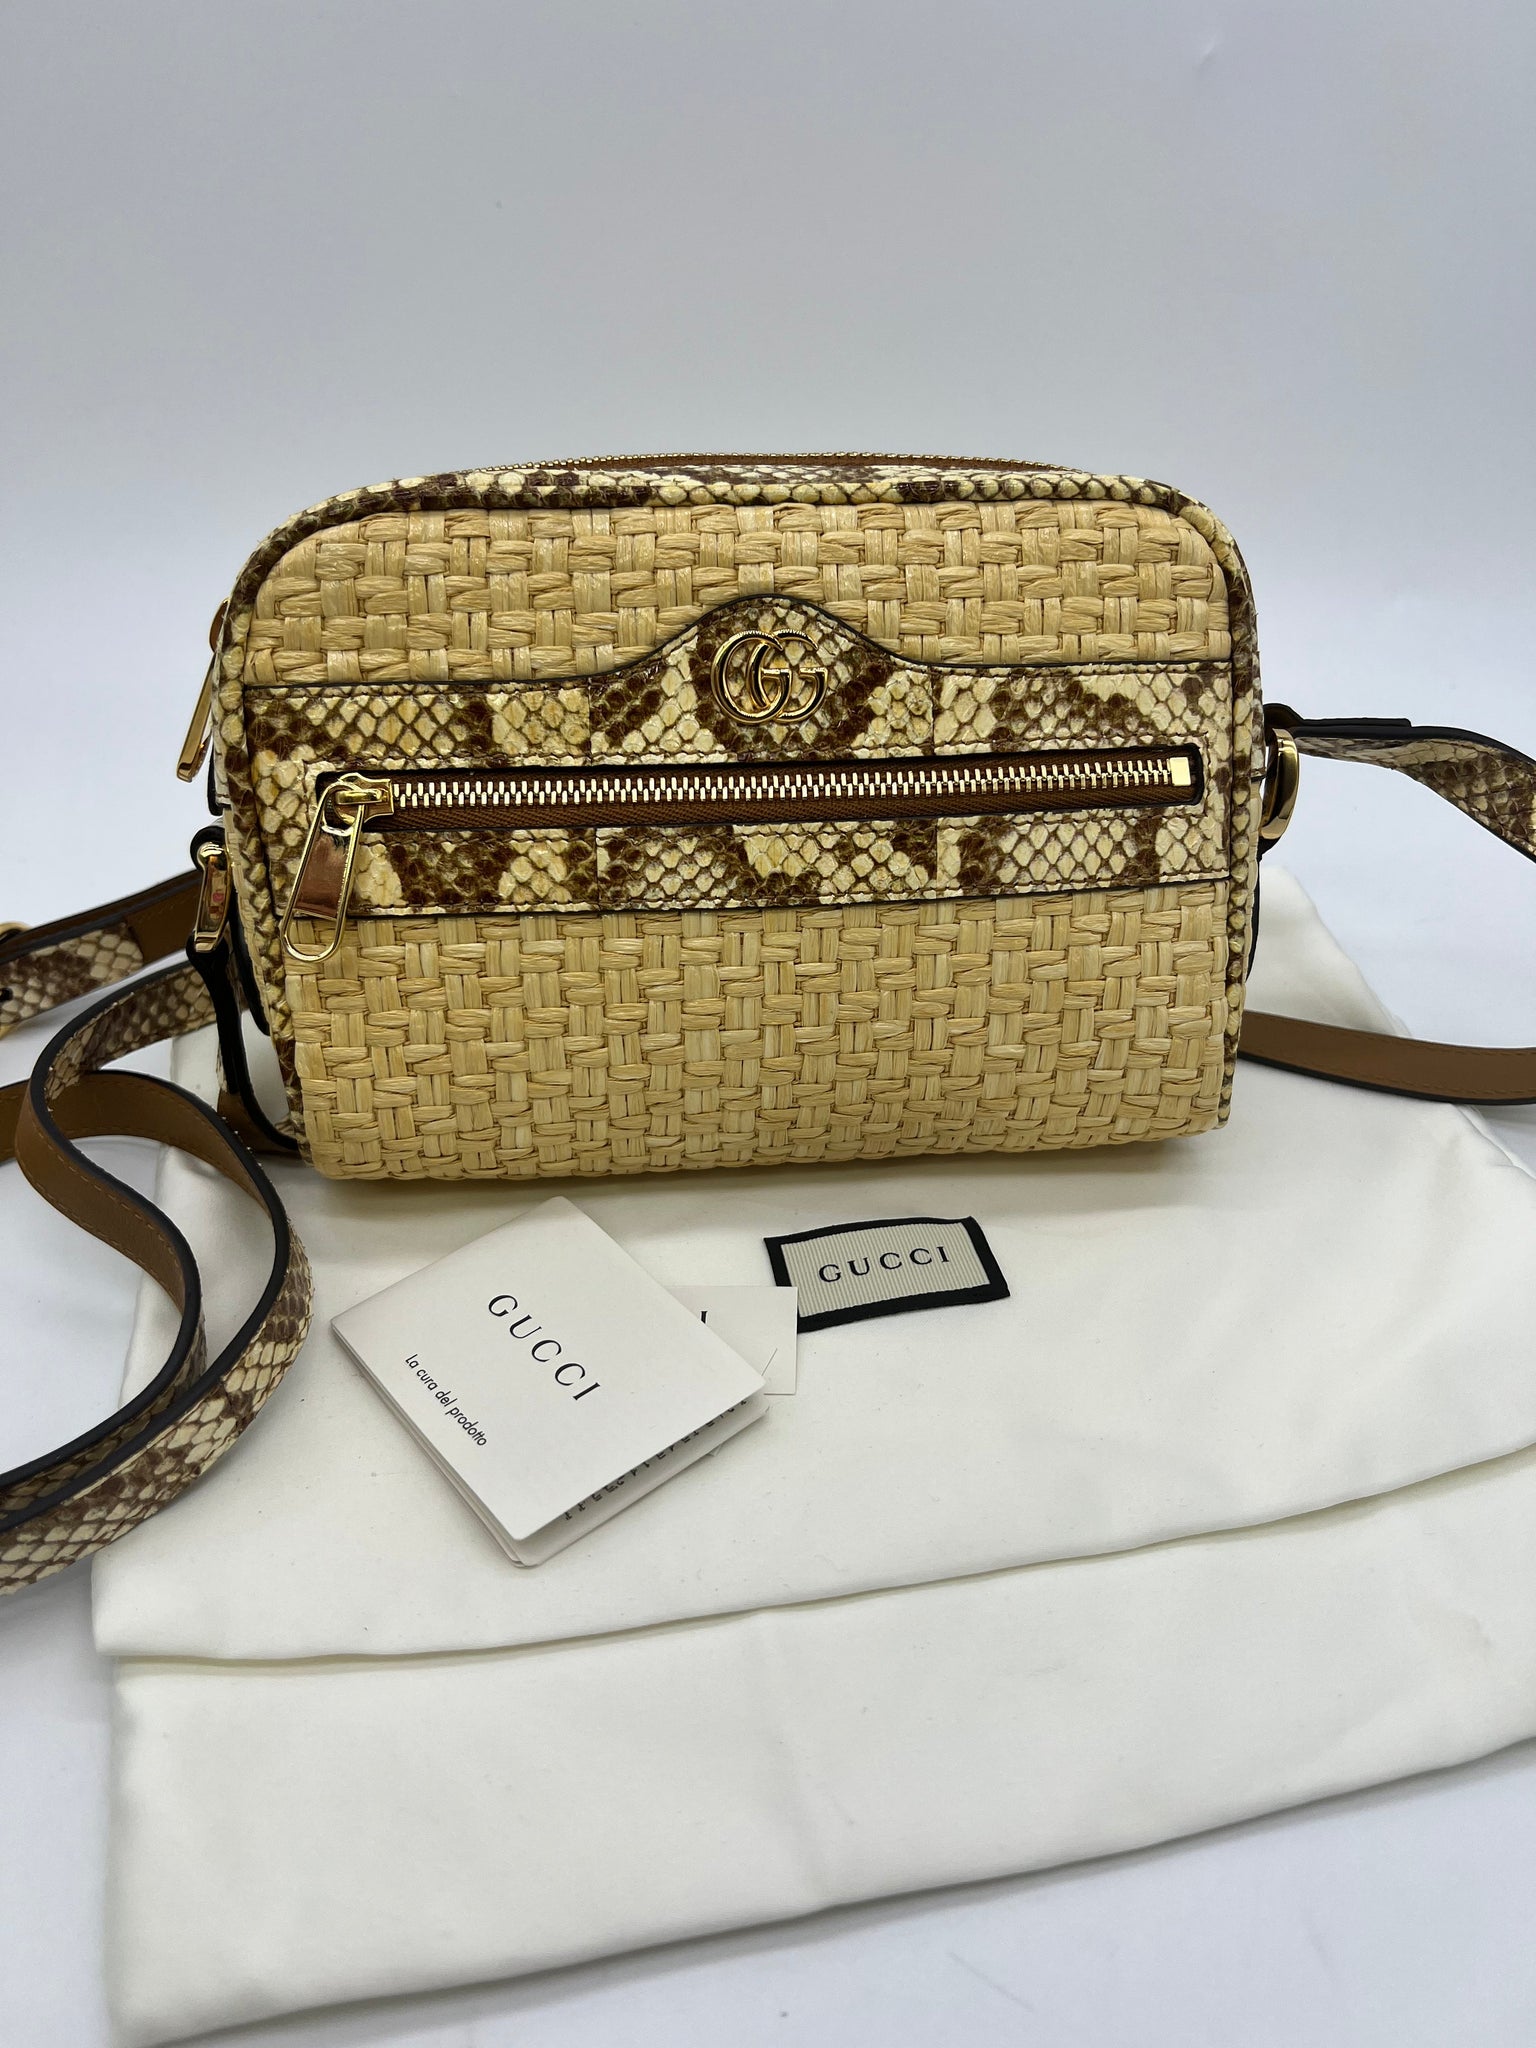 Gucci Ophidia - Shoulder bag for Woman - Beige - 722117FAAX3-9789